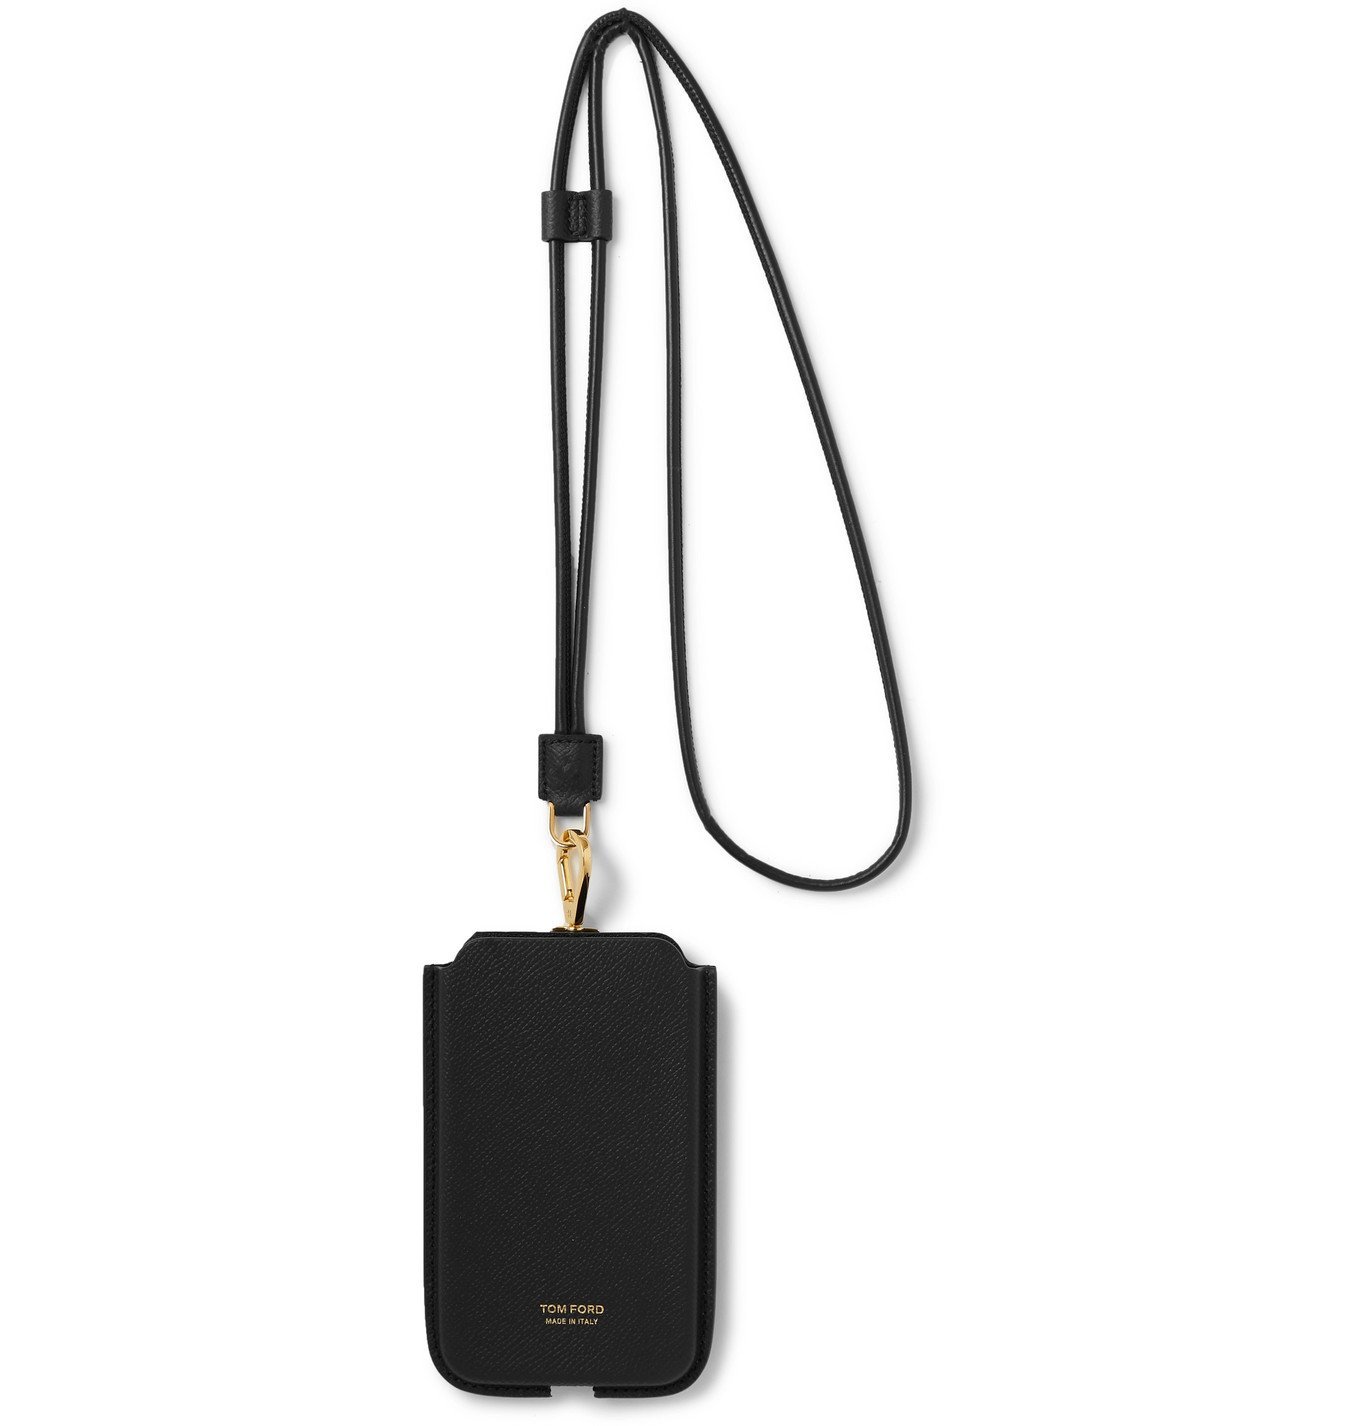 TOM FORD - Full-Grain Leather Phone Pouch with Lanyard - Black TOM FORD